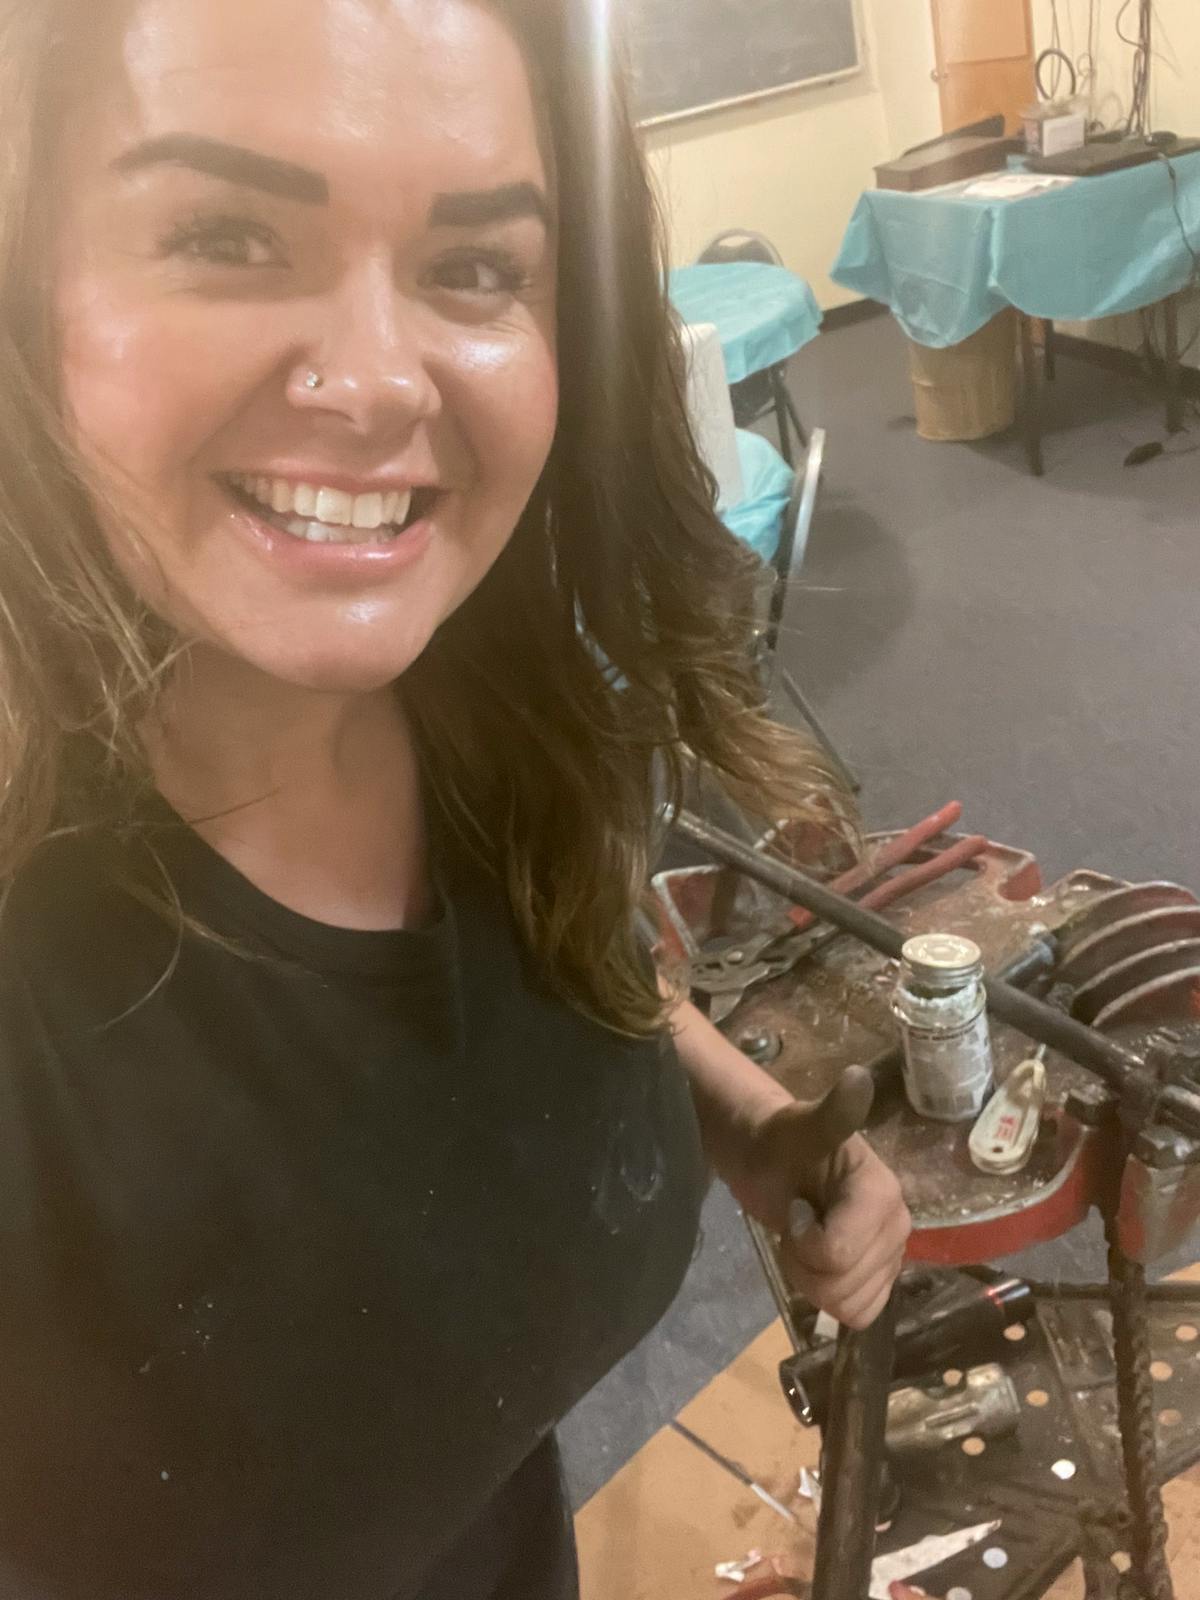 If you are willing to work, willing to learn and can turn a wrench, says Hudek, you can be taught. &ldquo;And if you&rsquo;re a woman, there&rsquo;s a place here for you. I&rsquo;m a woman, but when I&rsquo;m on the job, I&rsquo;m a plumber first and foremost,&rdquo; says Hudek.